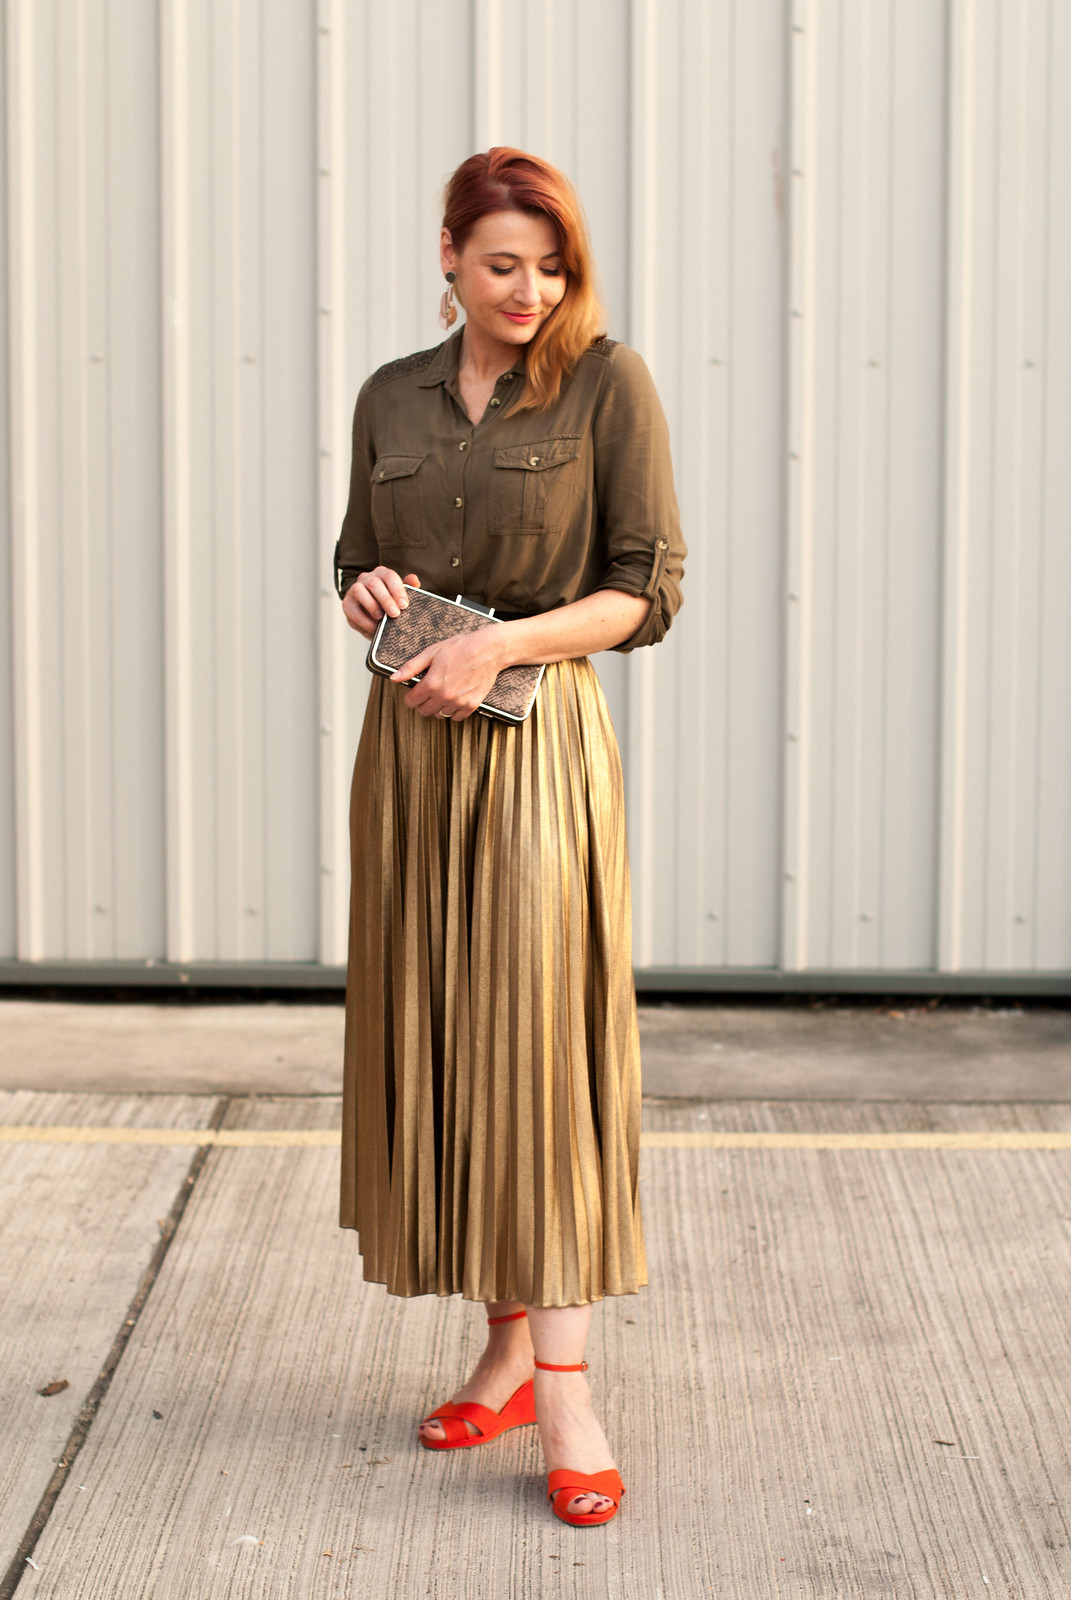 Date night outfit: Khaki soft shirt with embellished shoulders metallic gold pleated maxi skirt | orange-red wedge sandals metallic box clutch bag | Not Dressed As Lamb, over 40 style